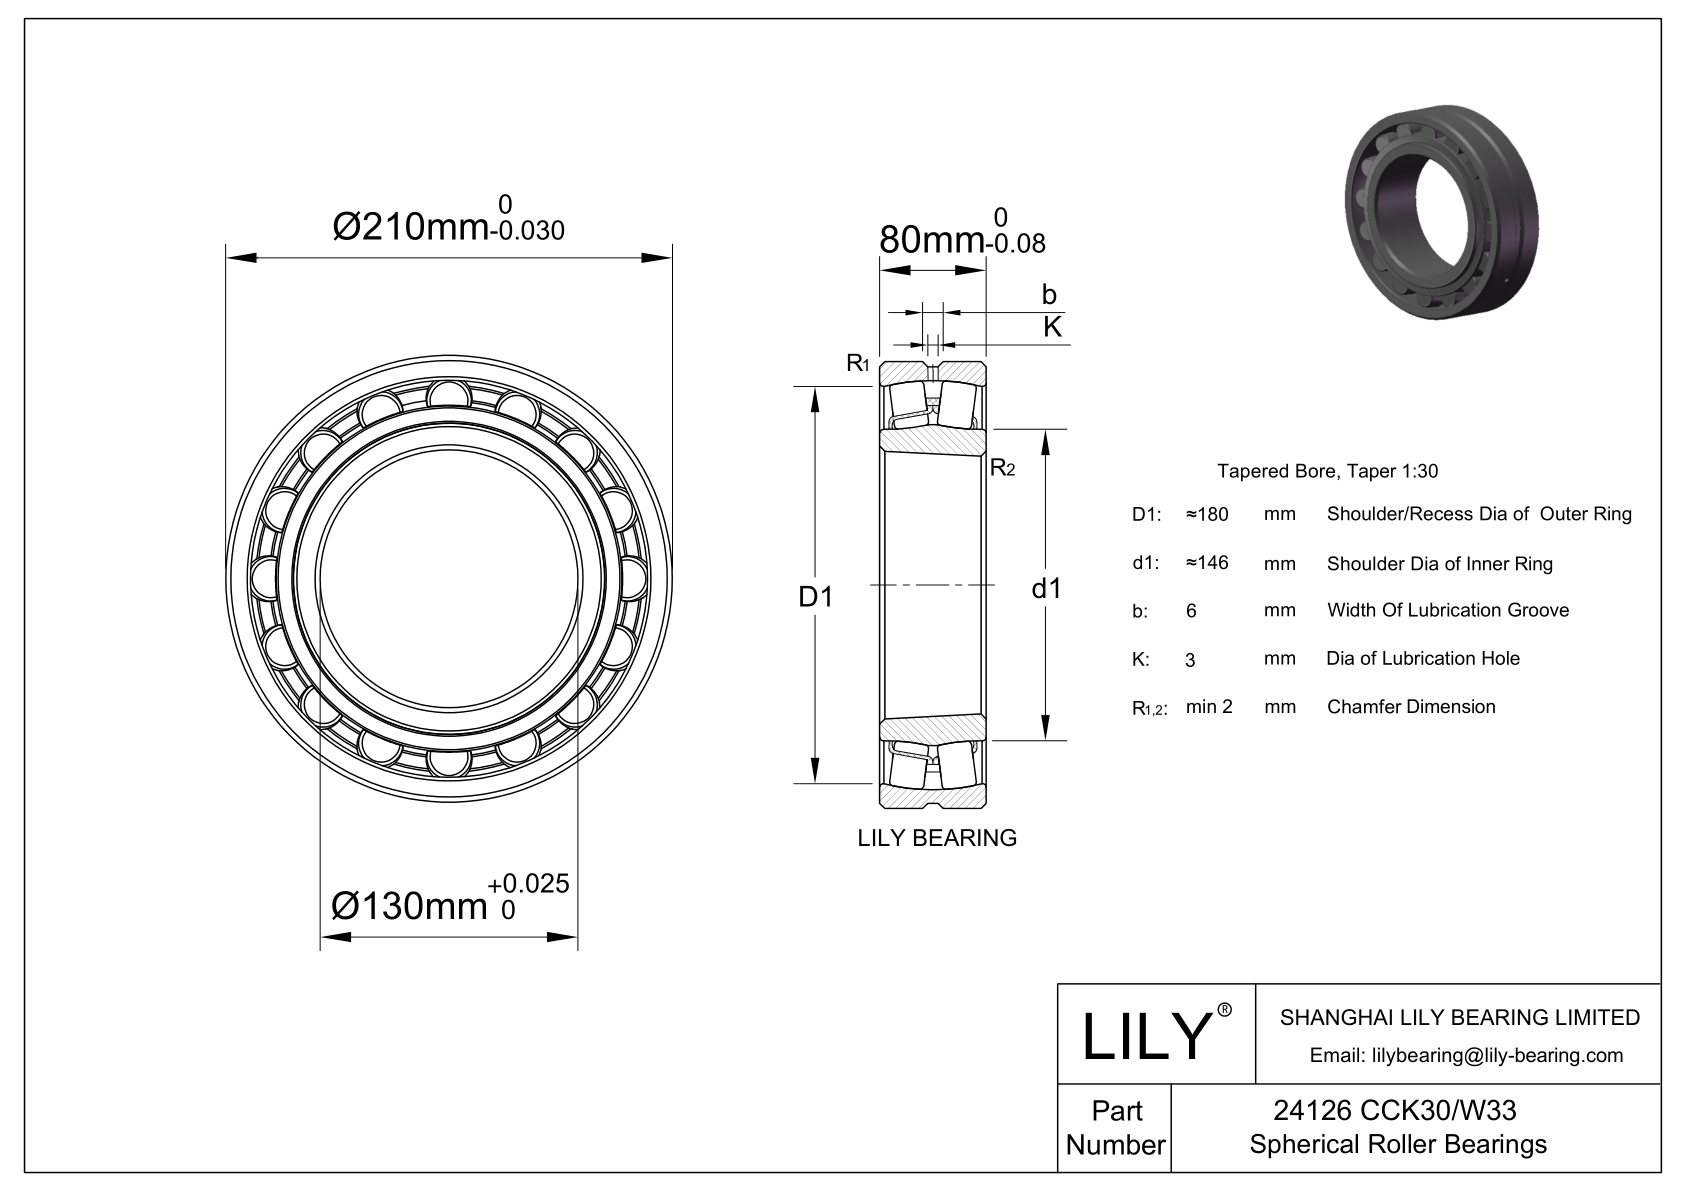 24126 CCK30/W33 Double Row Spherical Roller Bearing cad drawing